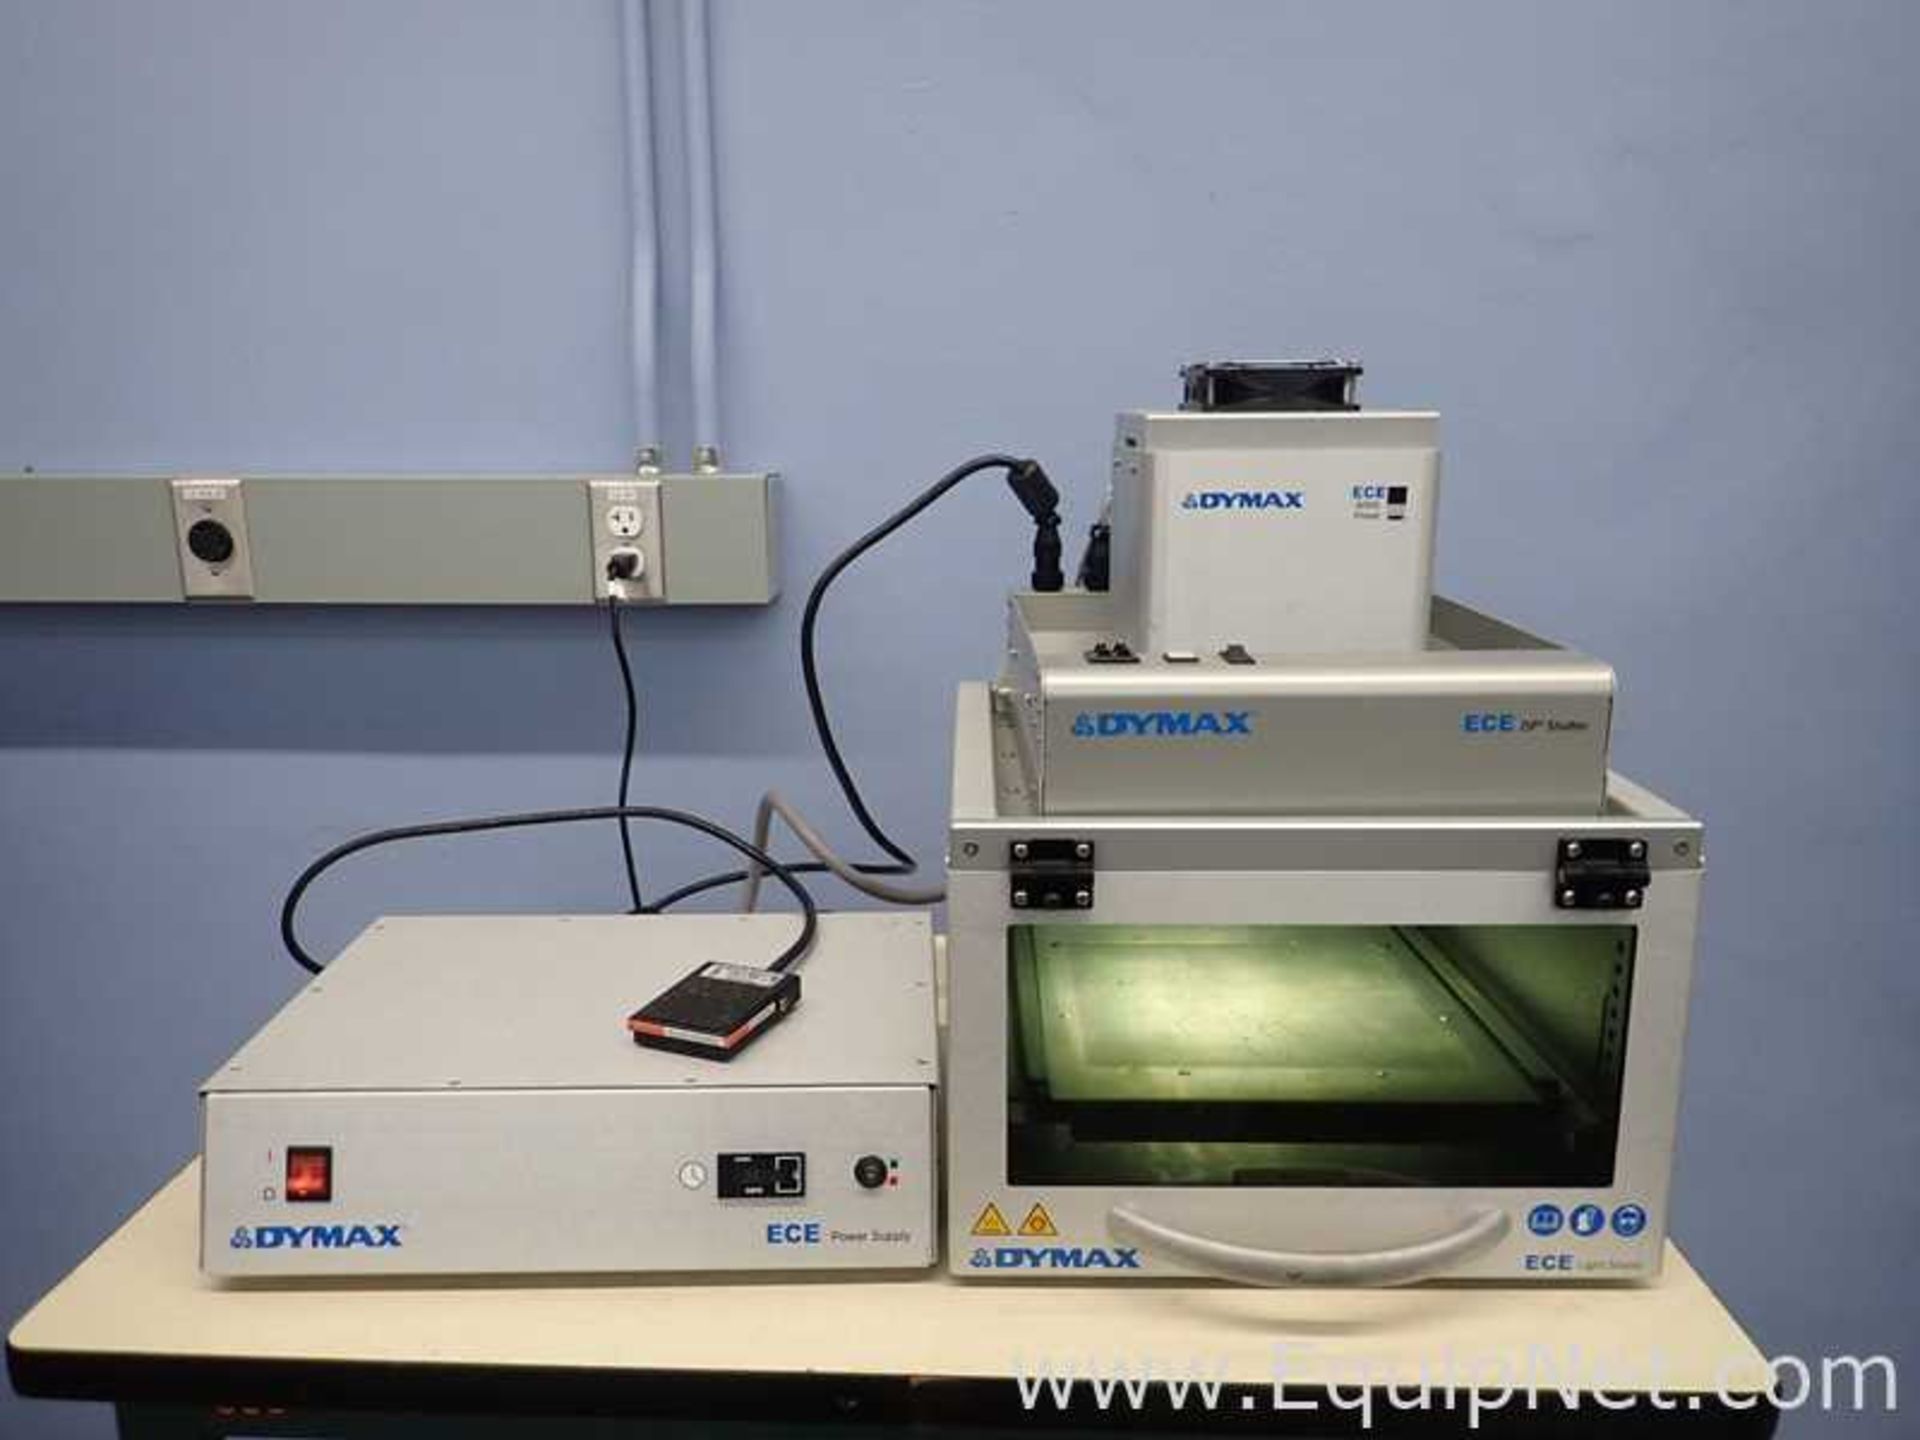 Dymax ECE Series UV Light-Curing Flood Lamp Systems